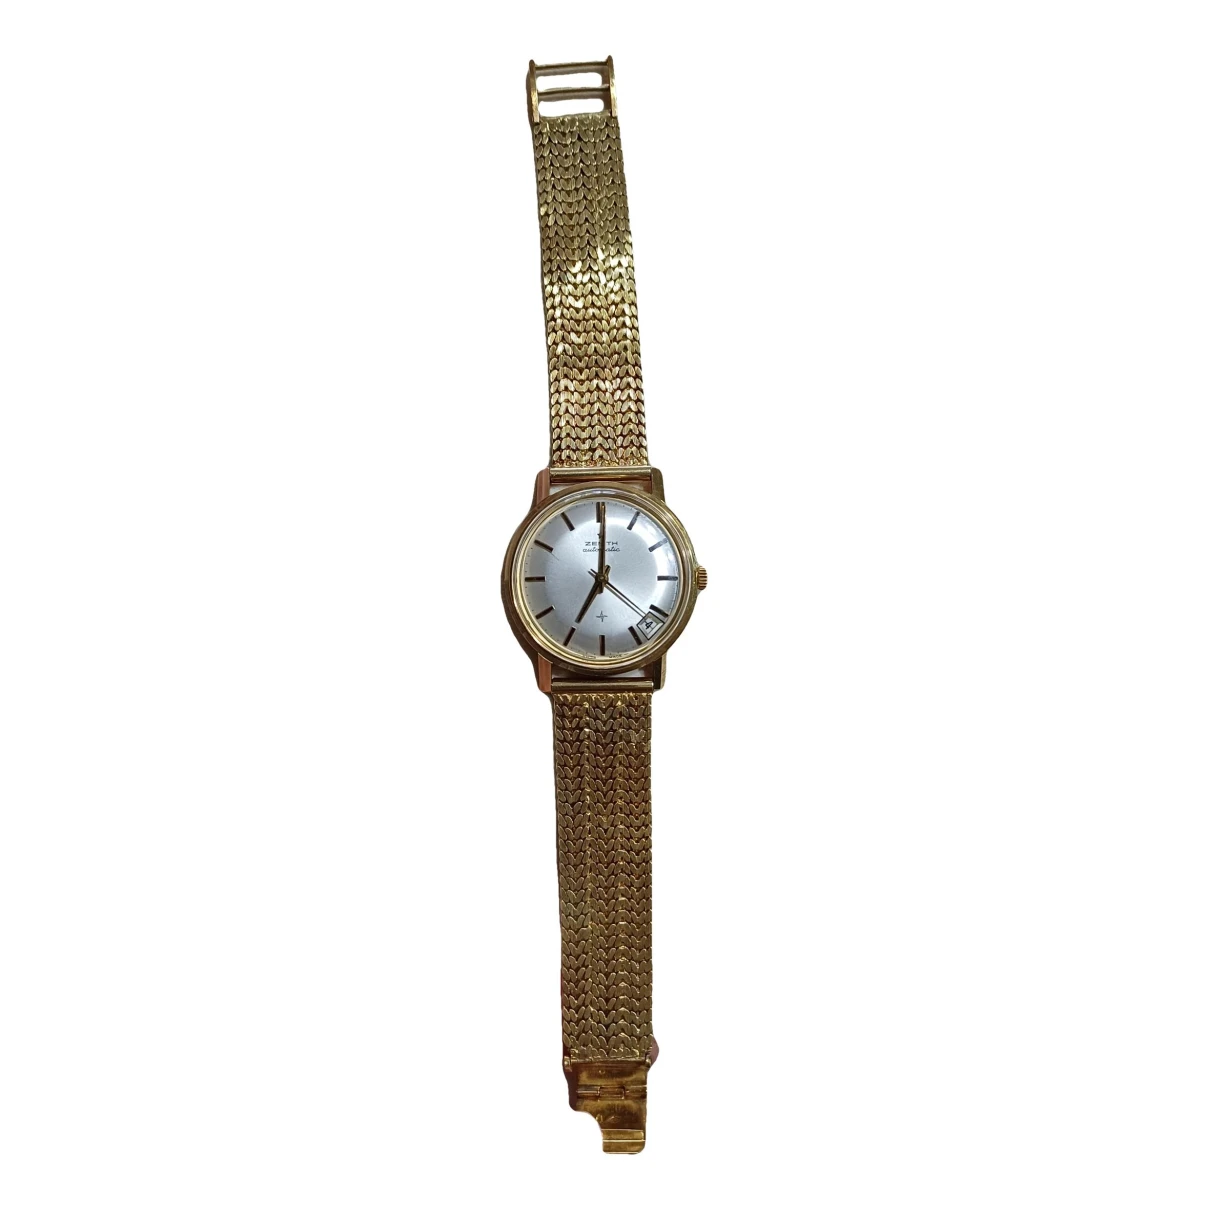 Pre-owned Zenith Classique Gold Watch